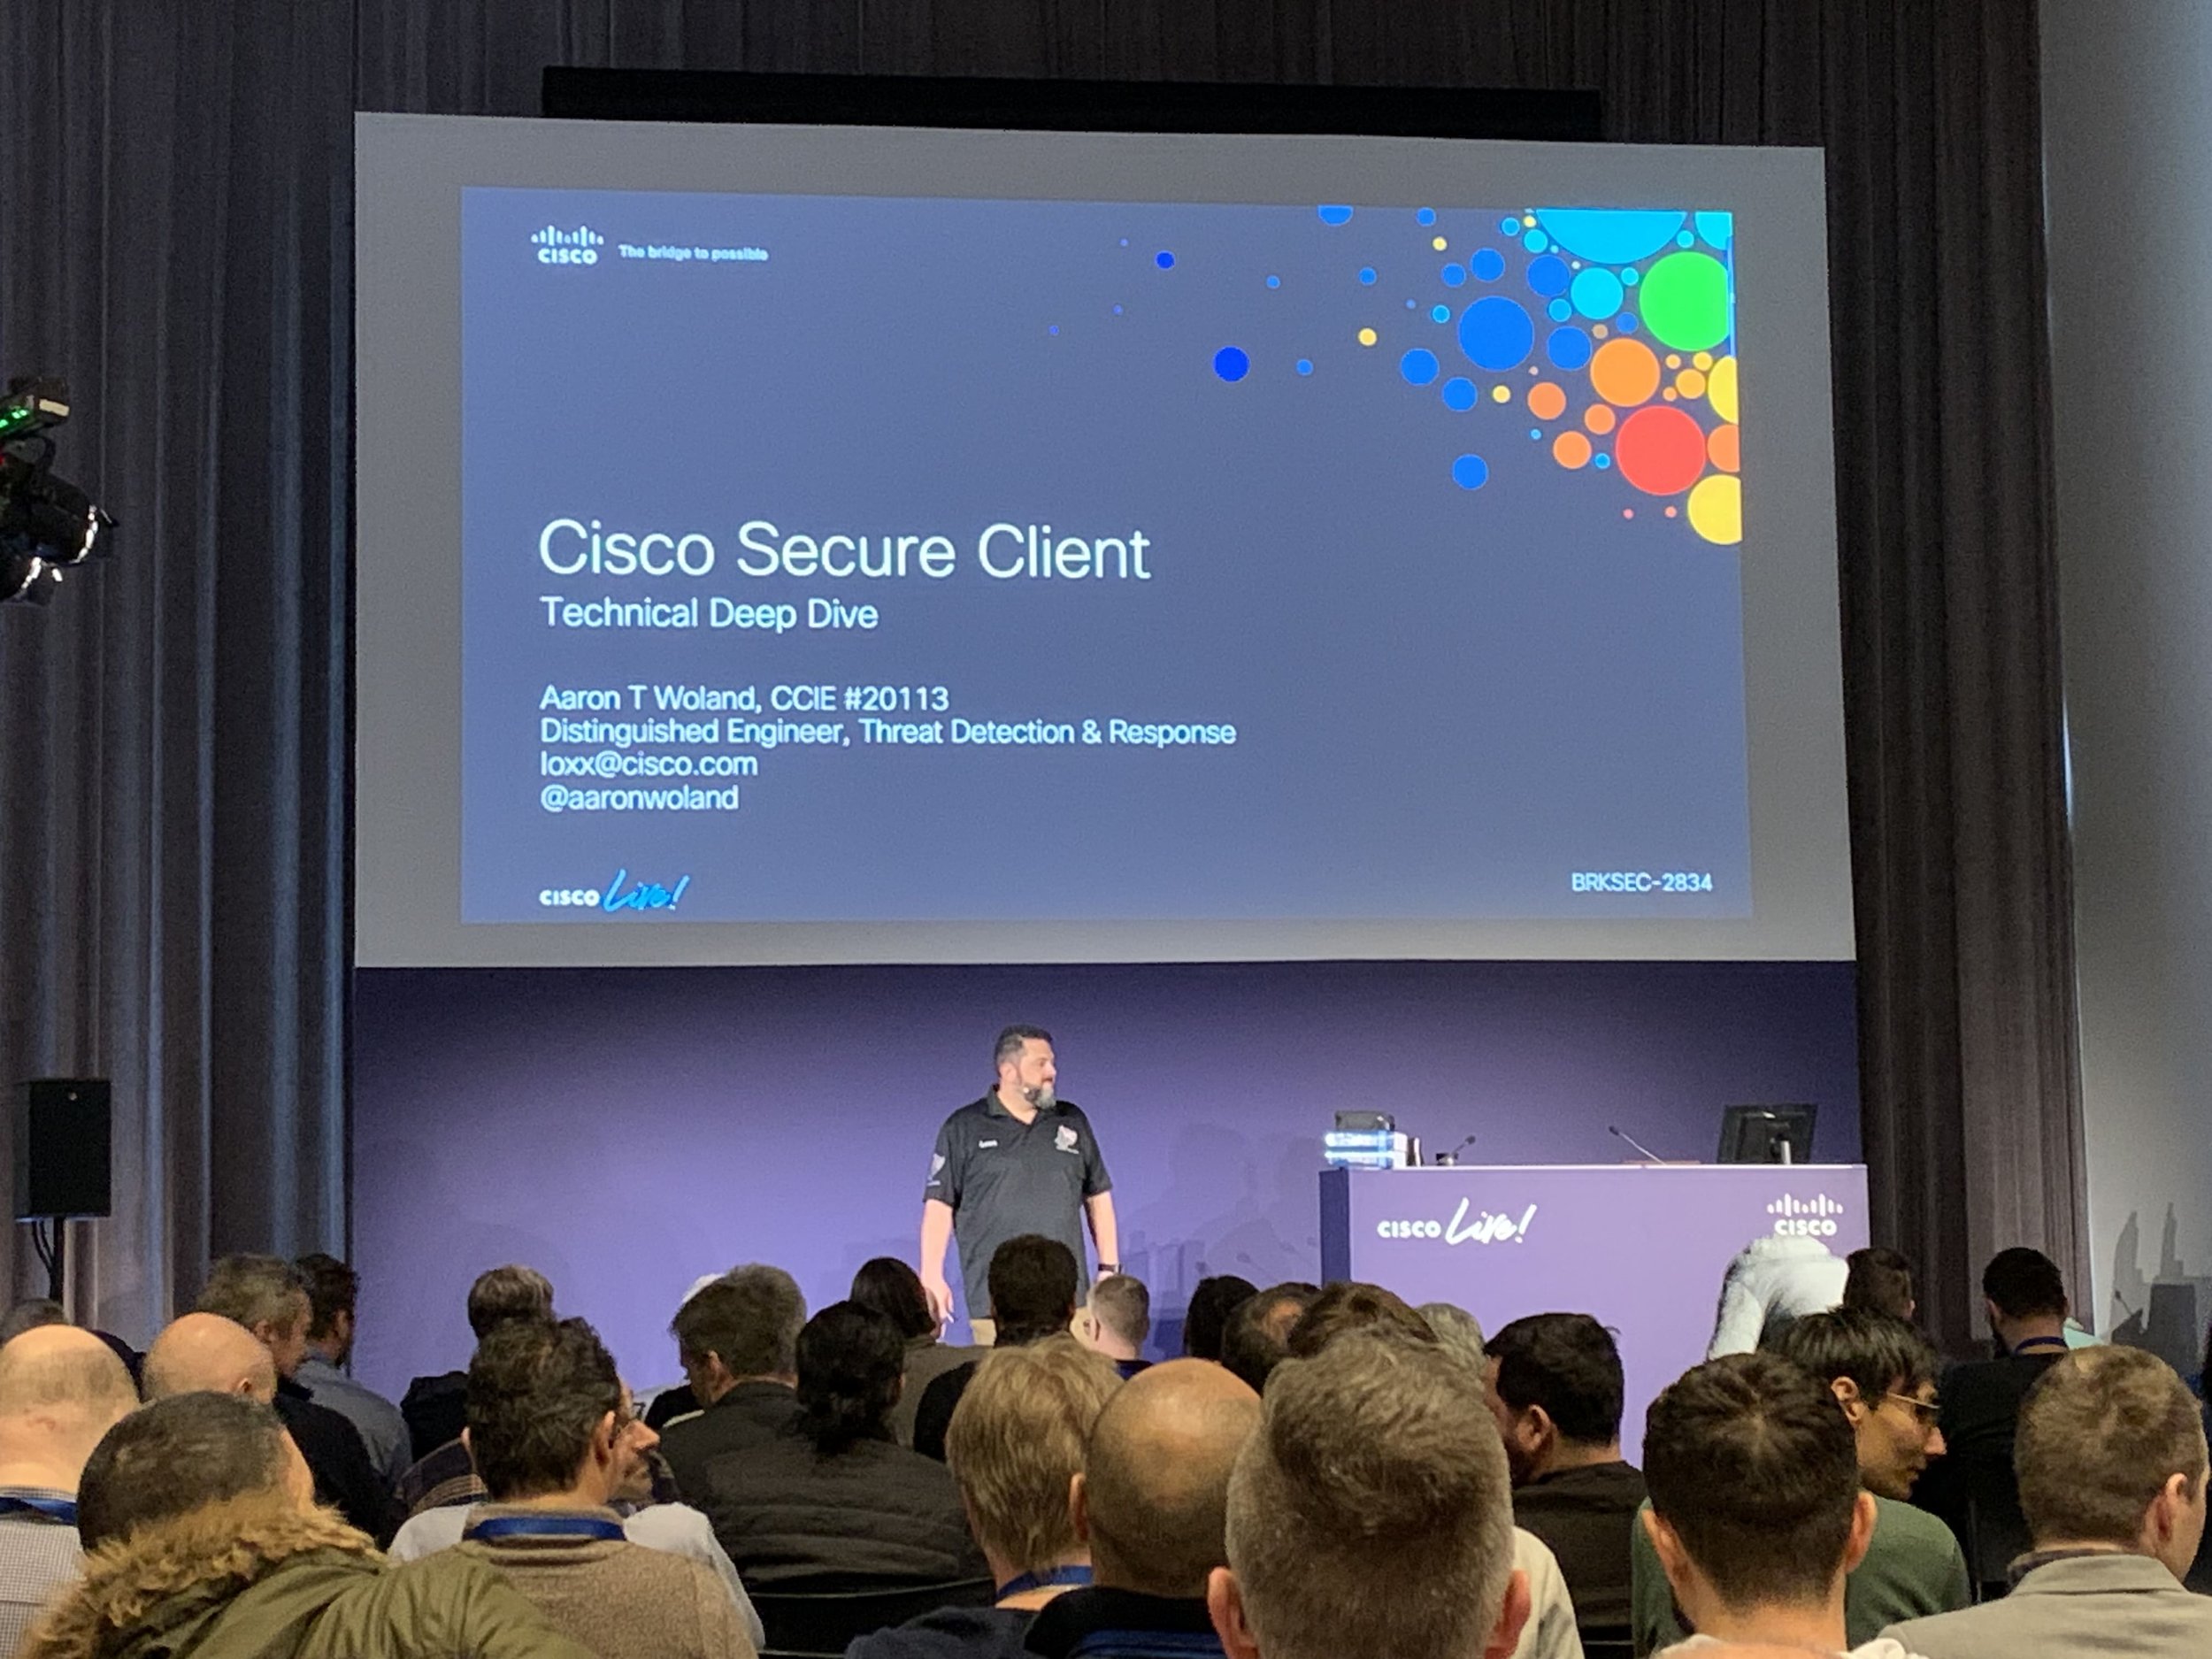 Aaron Woland rambling about Cisco product names